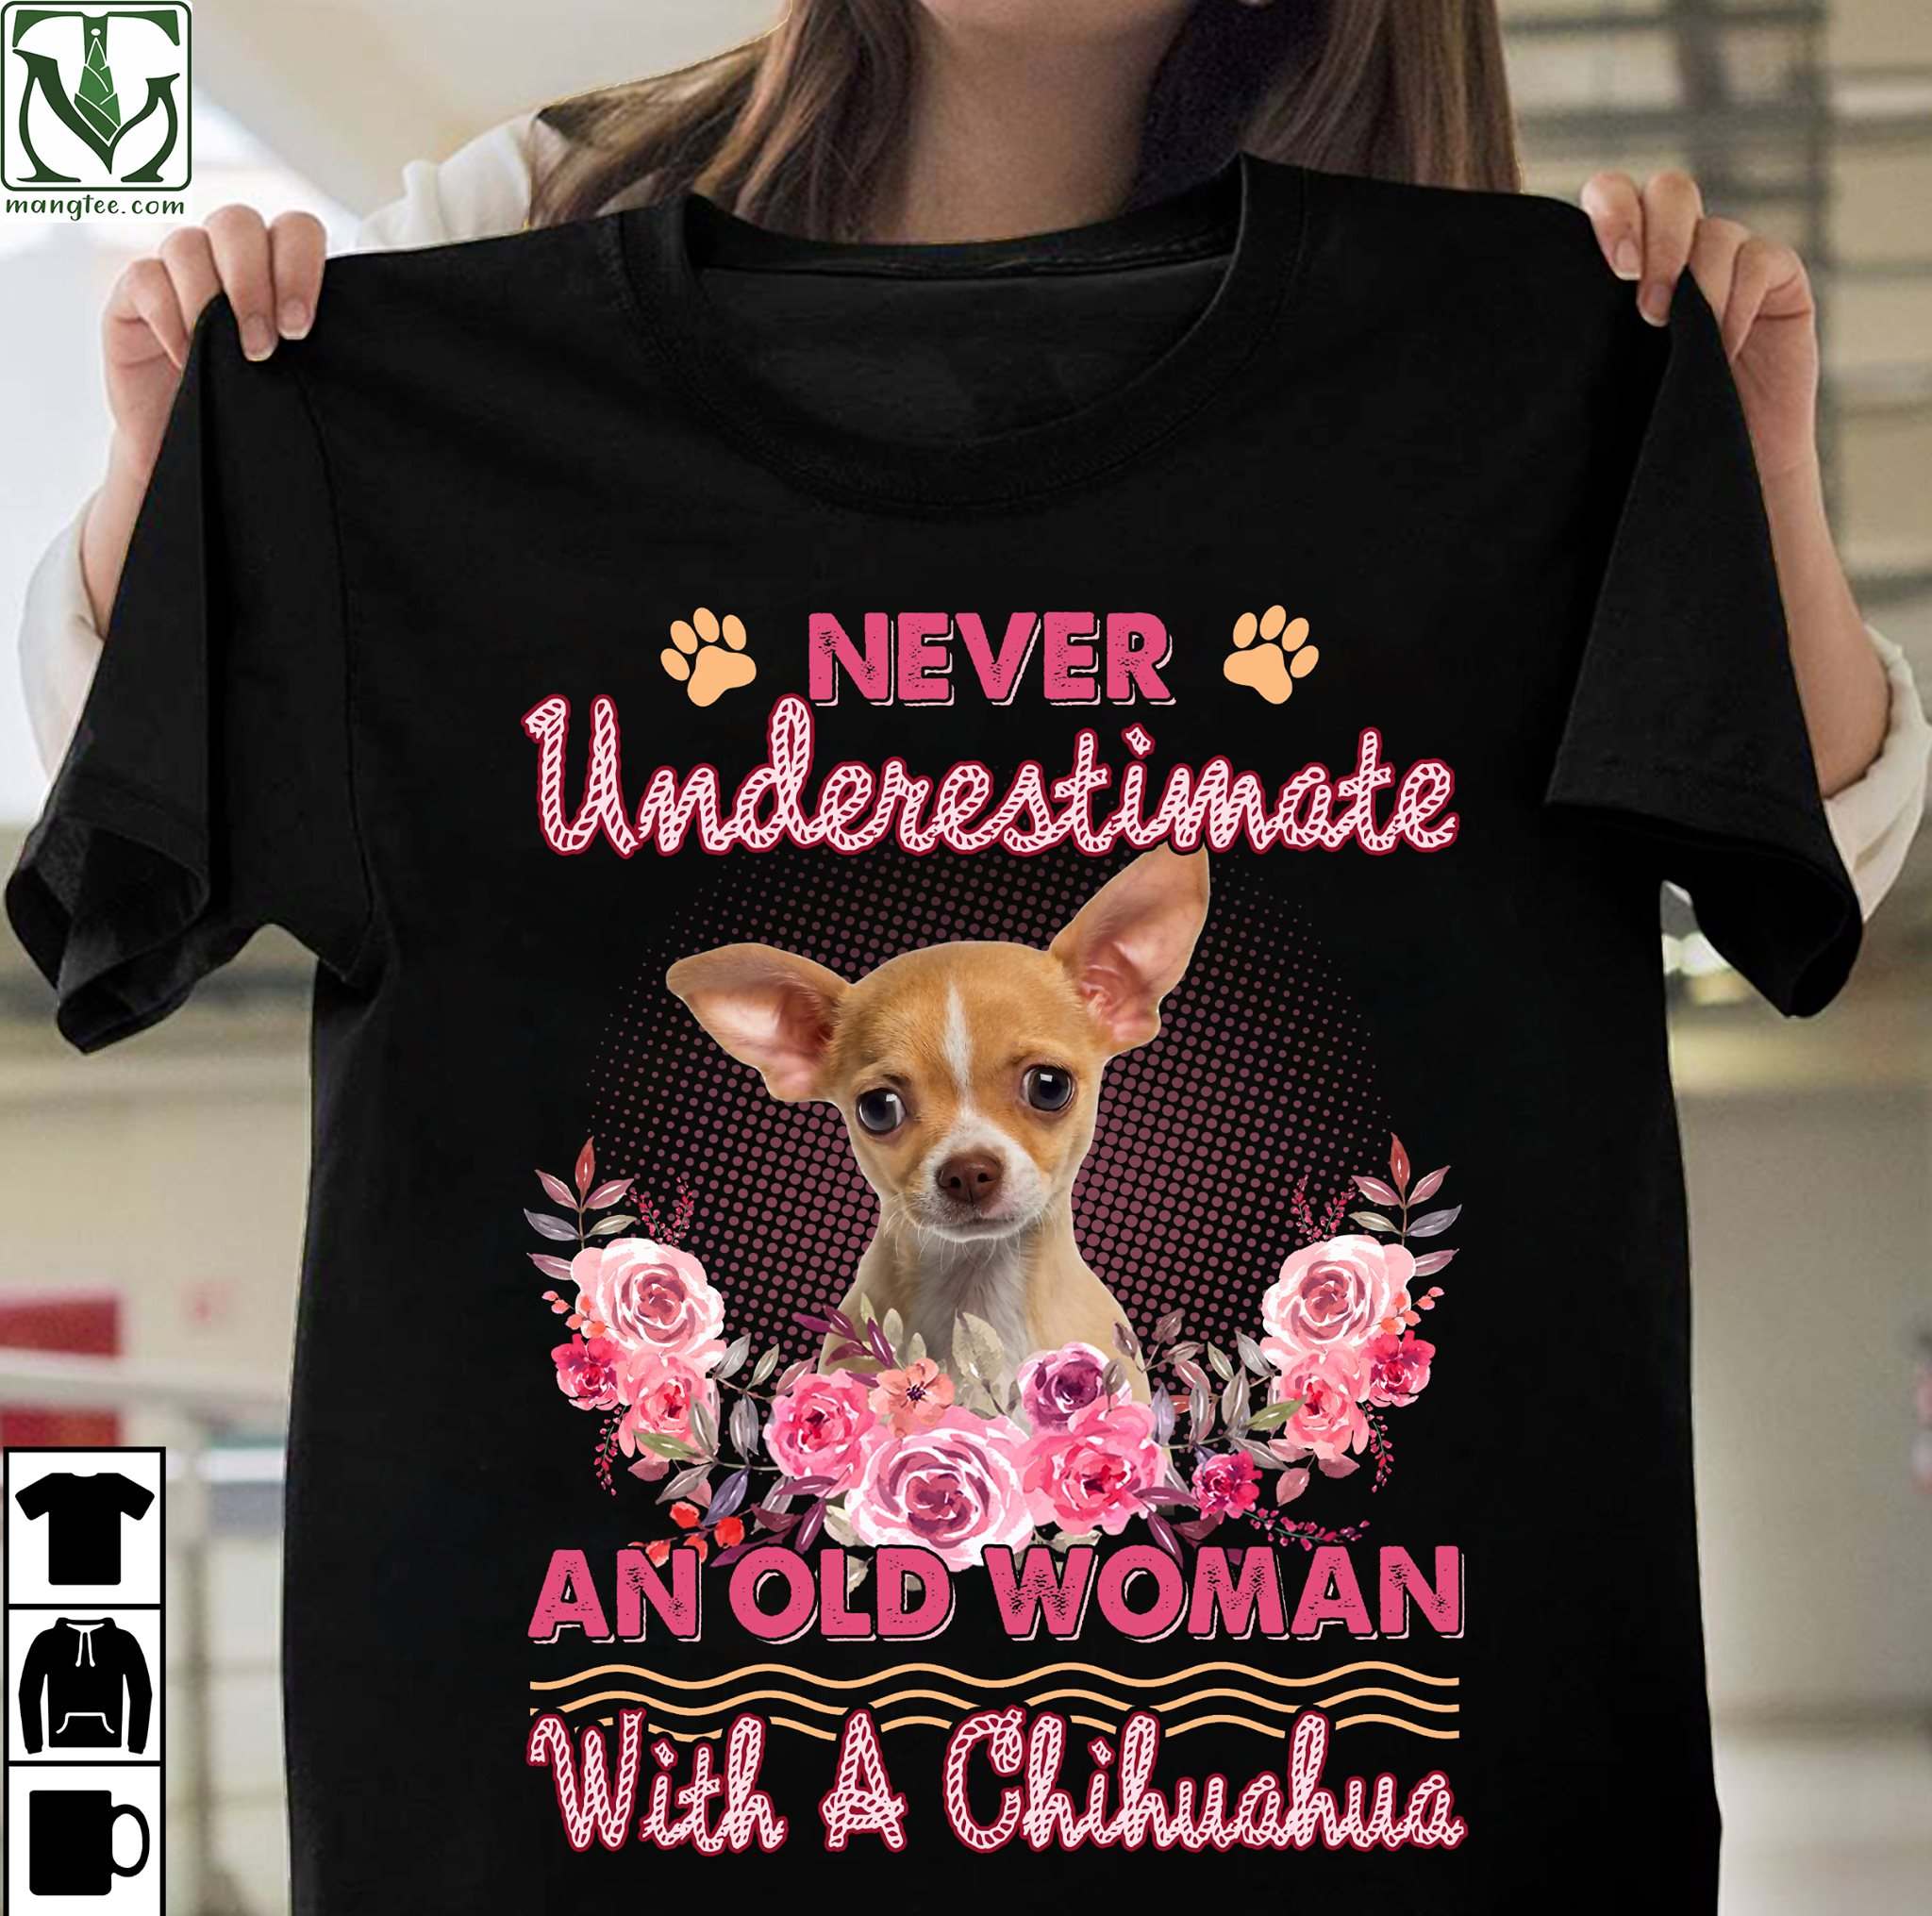 Never underestimate an old woman with a Chihuahua - Chihuahua dog, woman loves Chihuahua